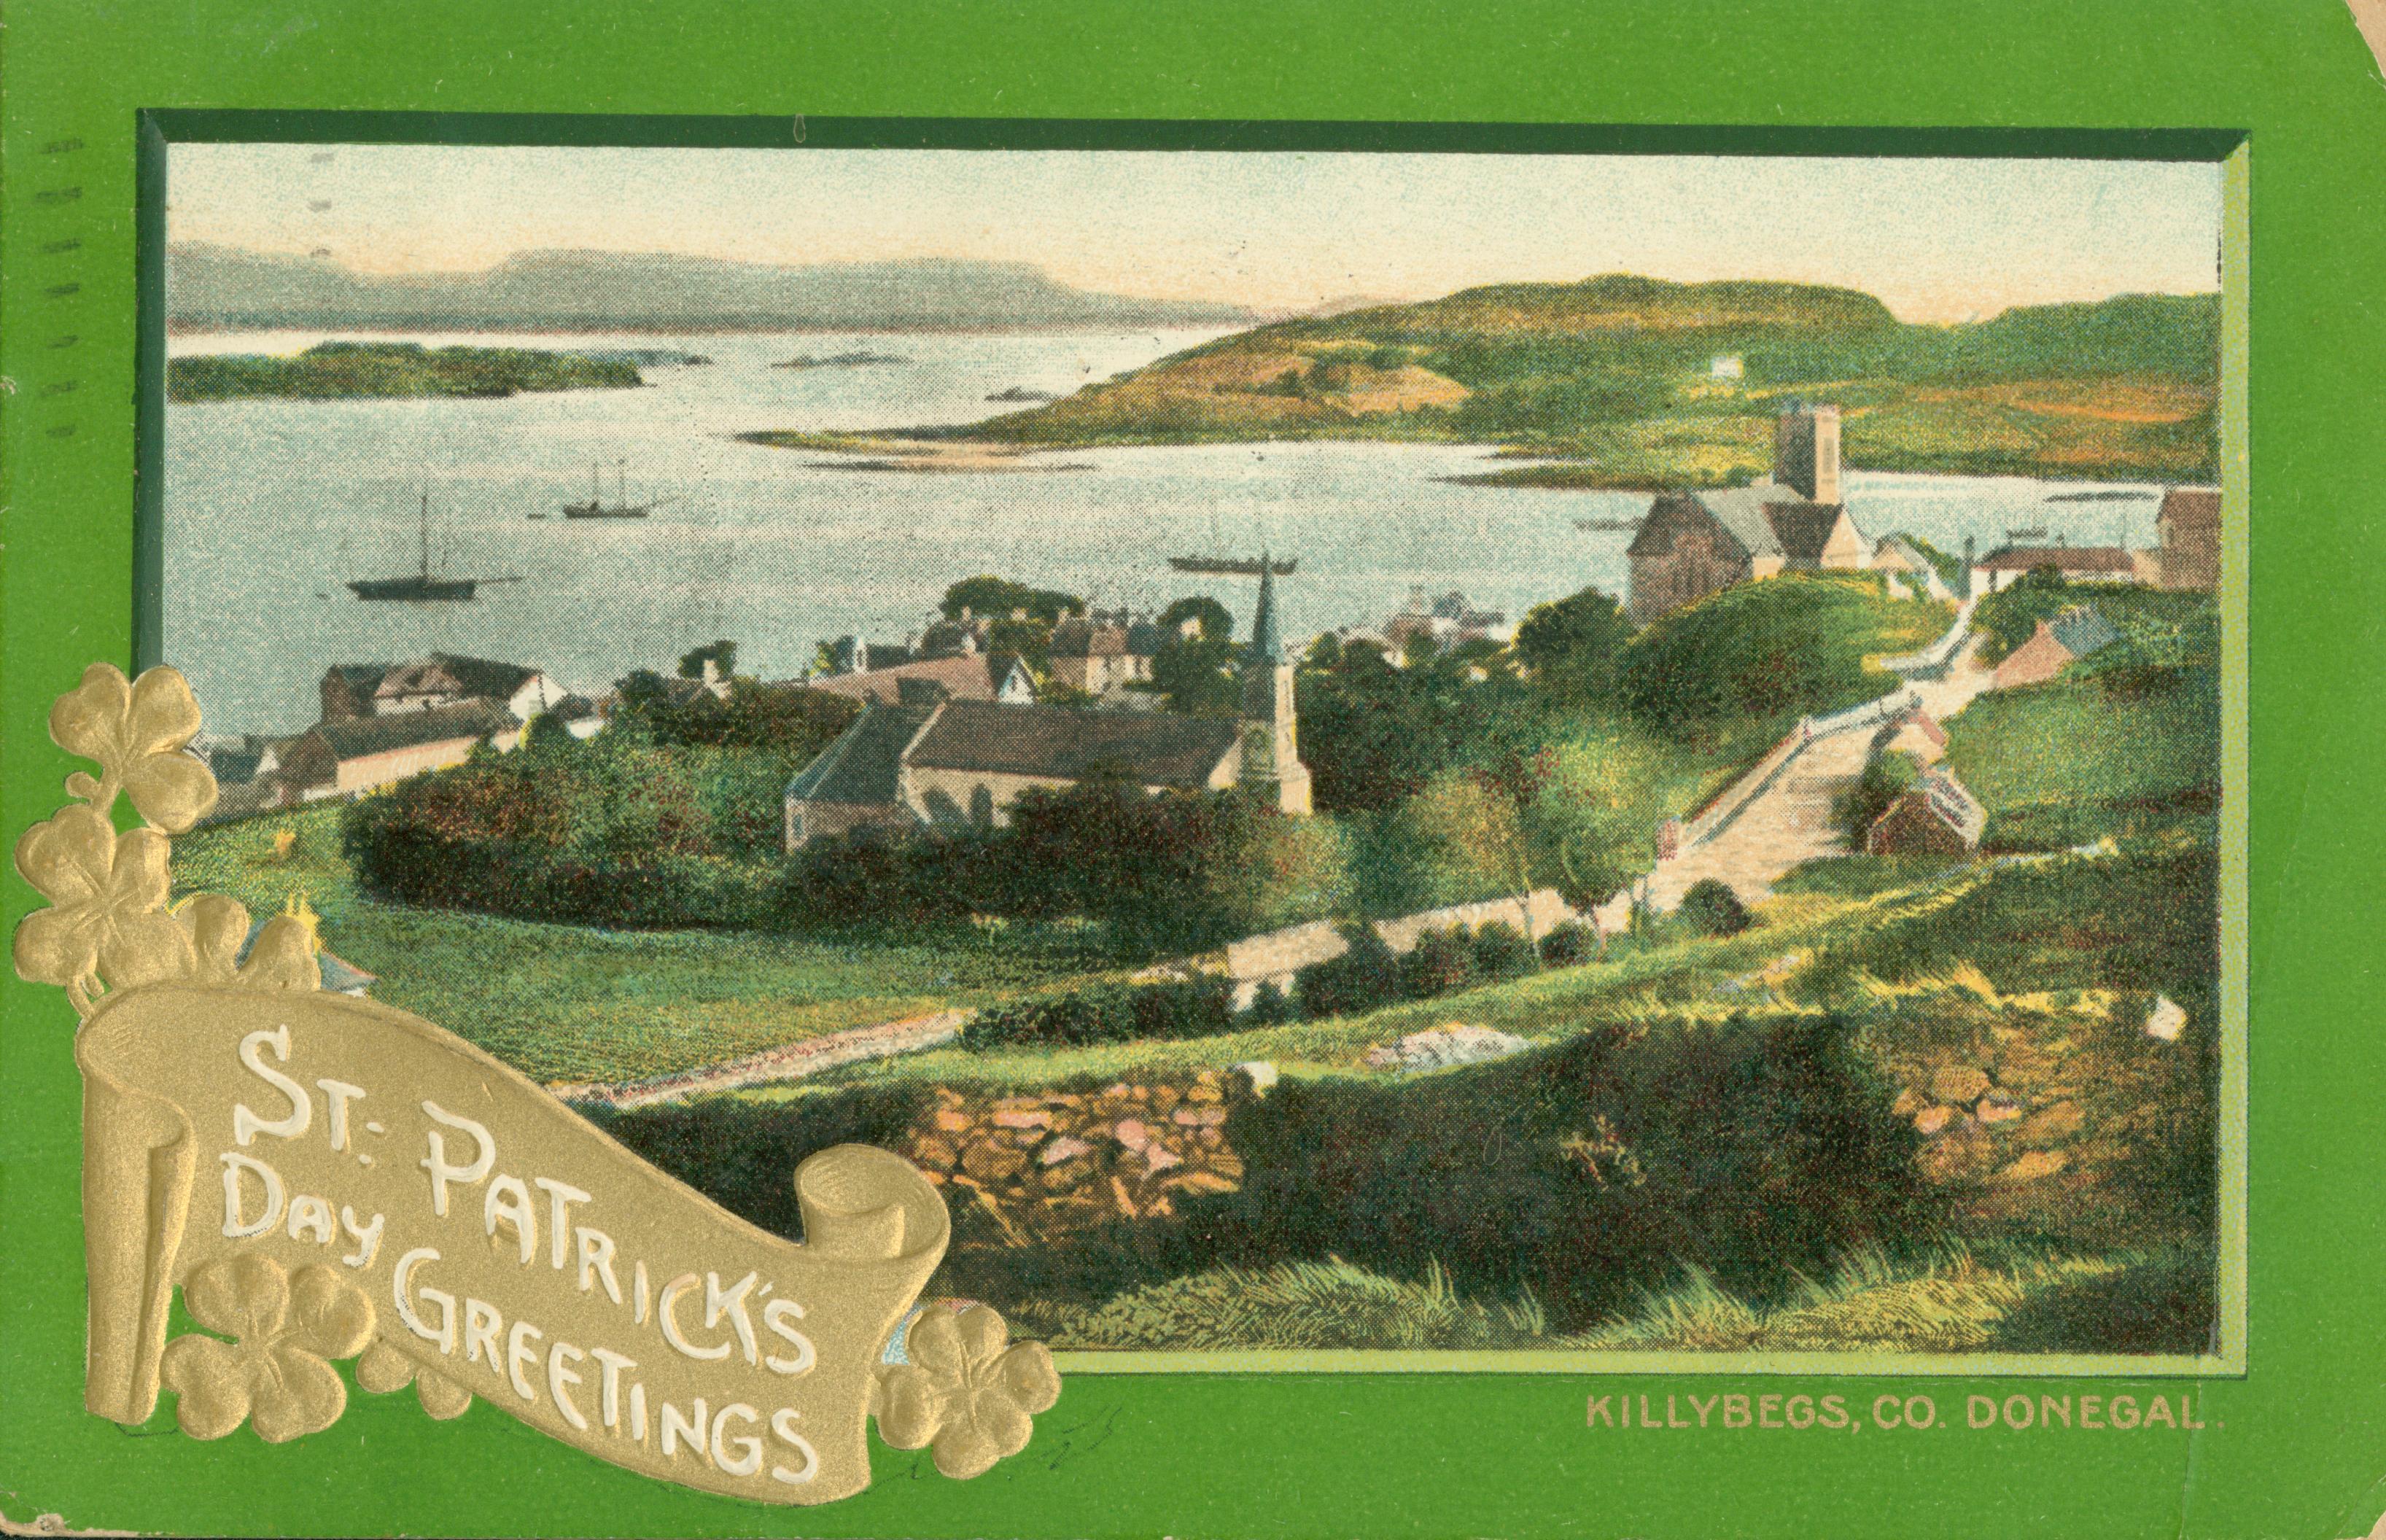 Shows a hilltop view of Killybegs